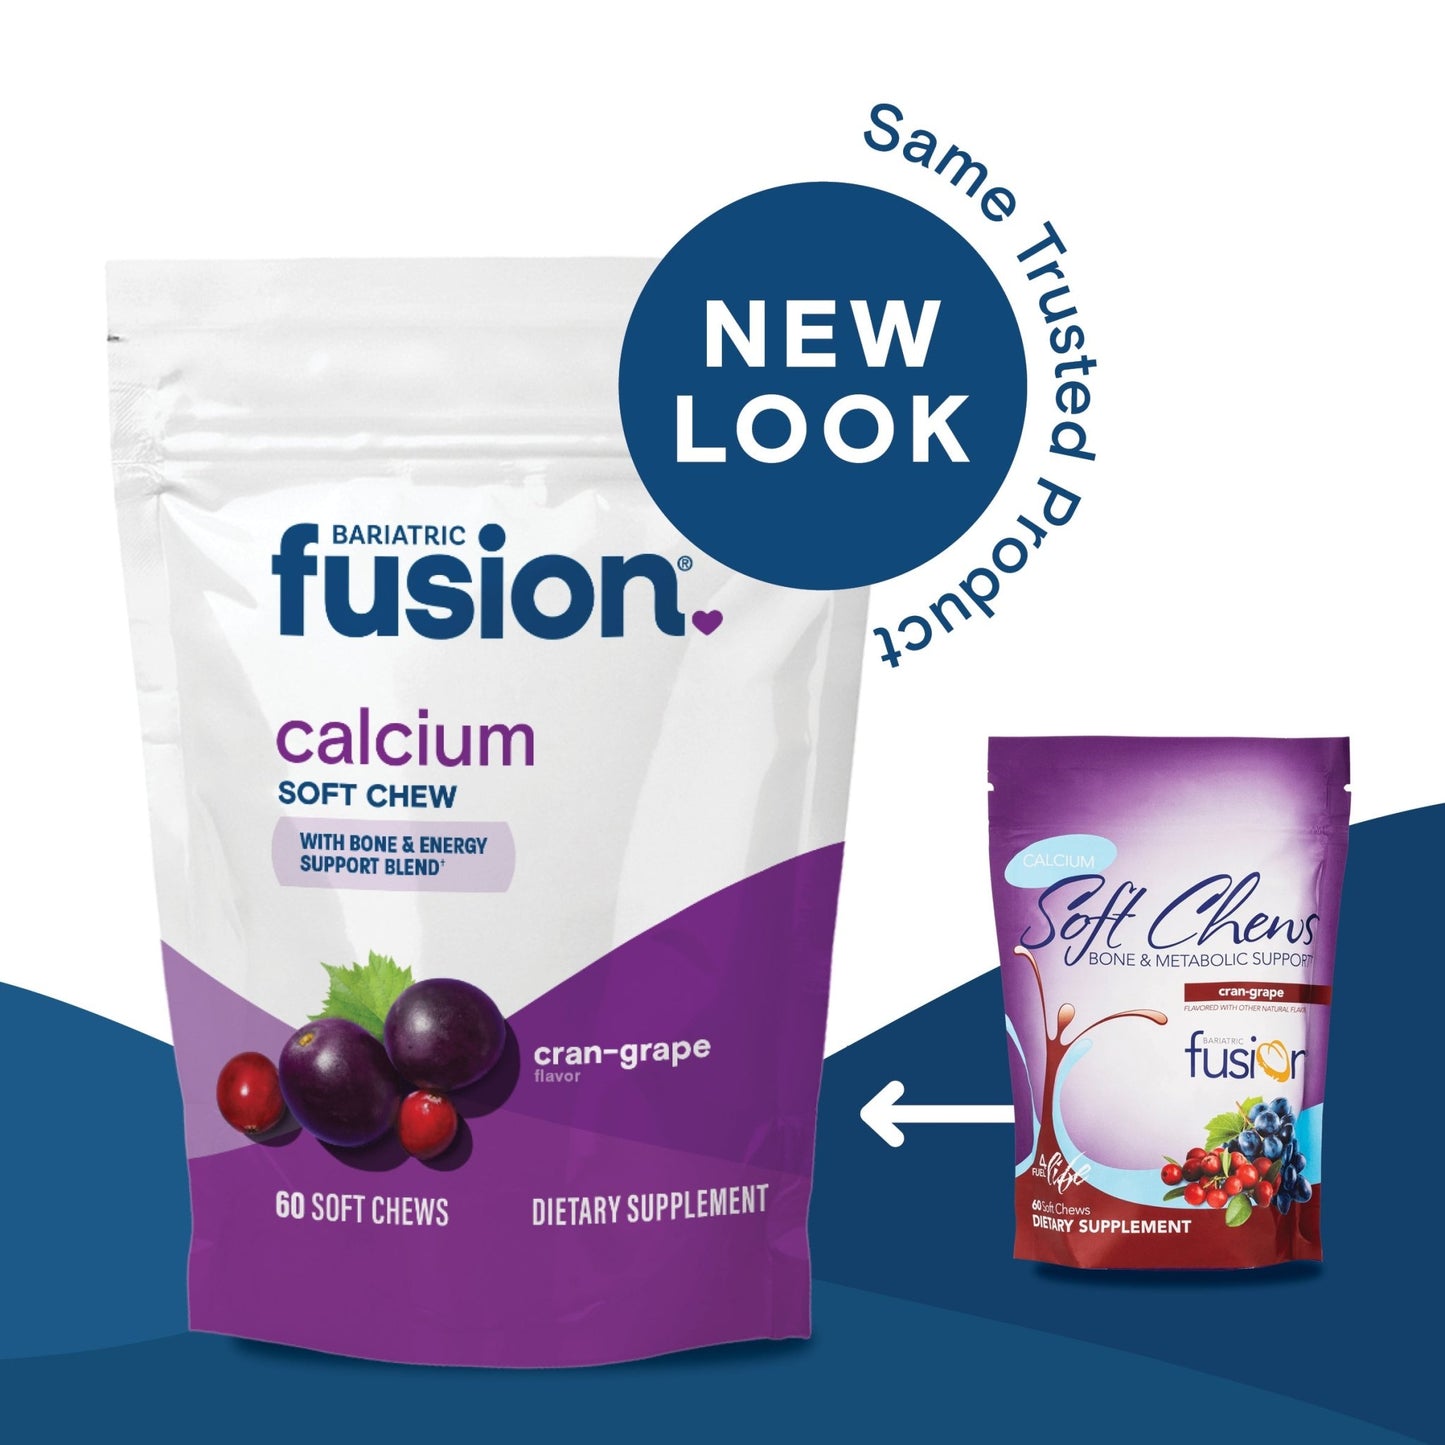 Cran-Grape Bariatric Calcium Citrate Soft Chews new look, same trusted product.